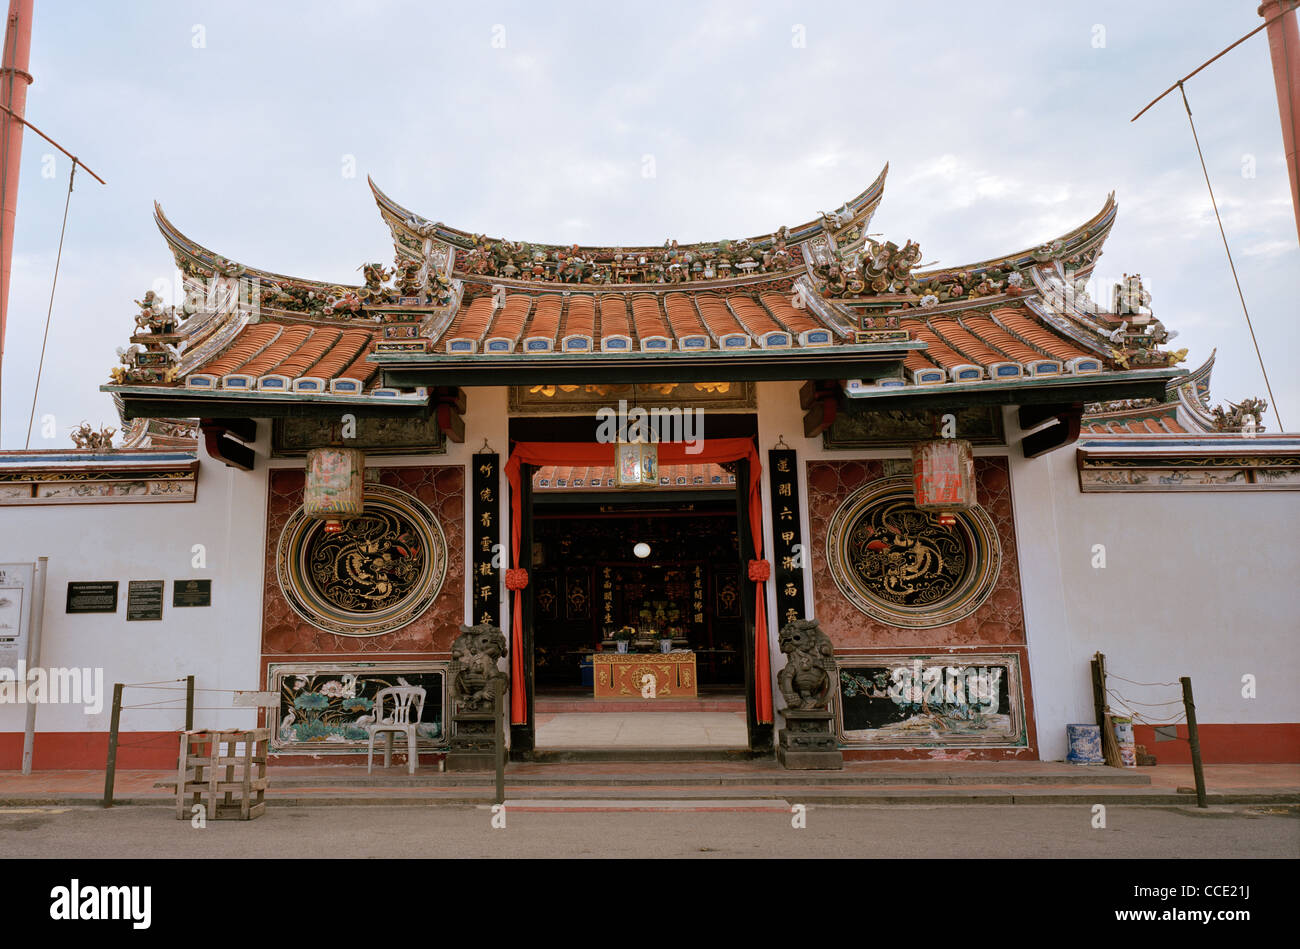 Chinese Cheng Hoon Teng Temple in Malacca Melaka in Malaysia in Southeast Asia. Buddhism Confucianism and Taoism are practiced at this temple. Travel Stock Photo